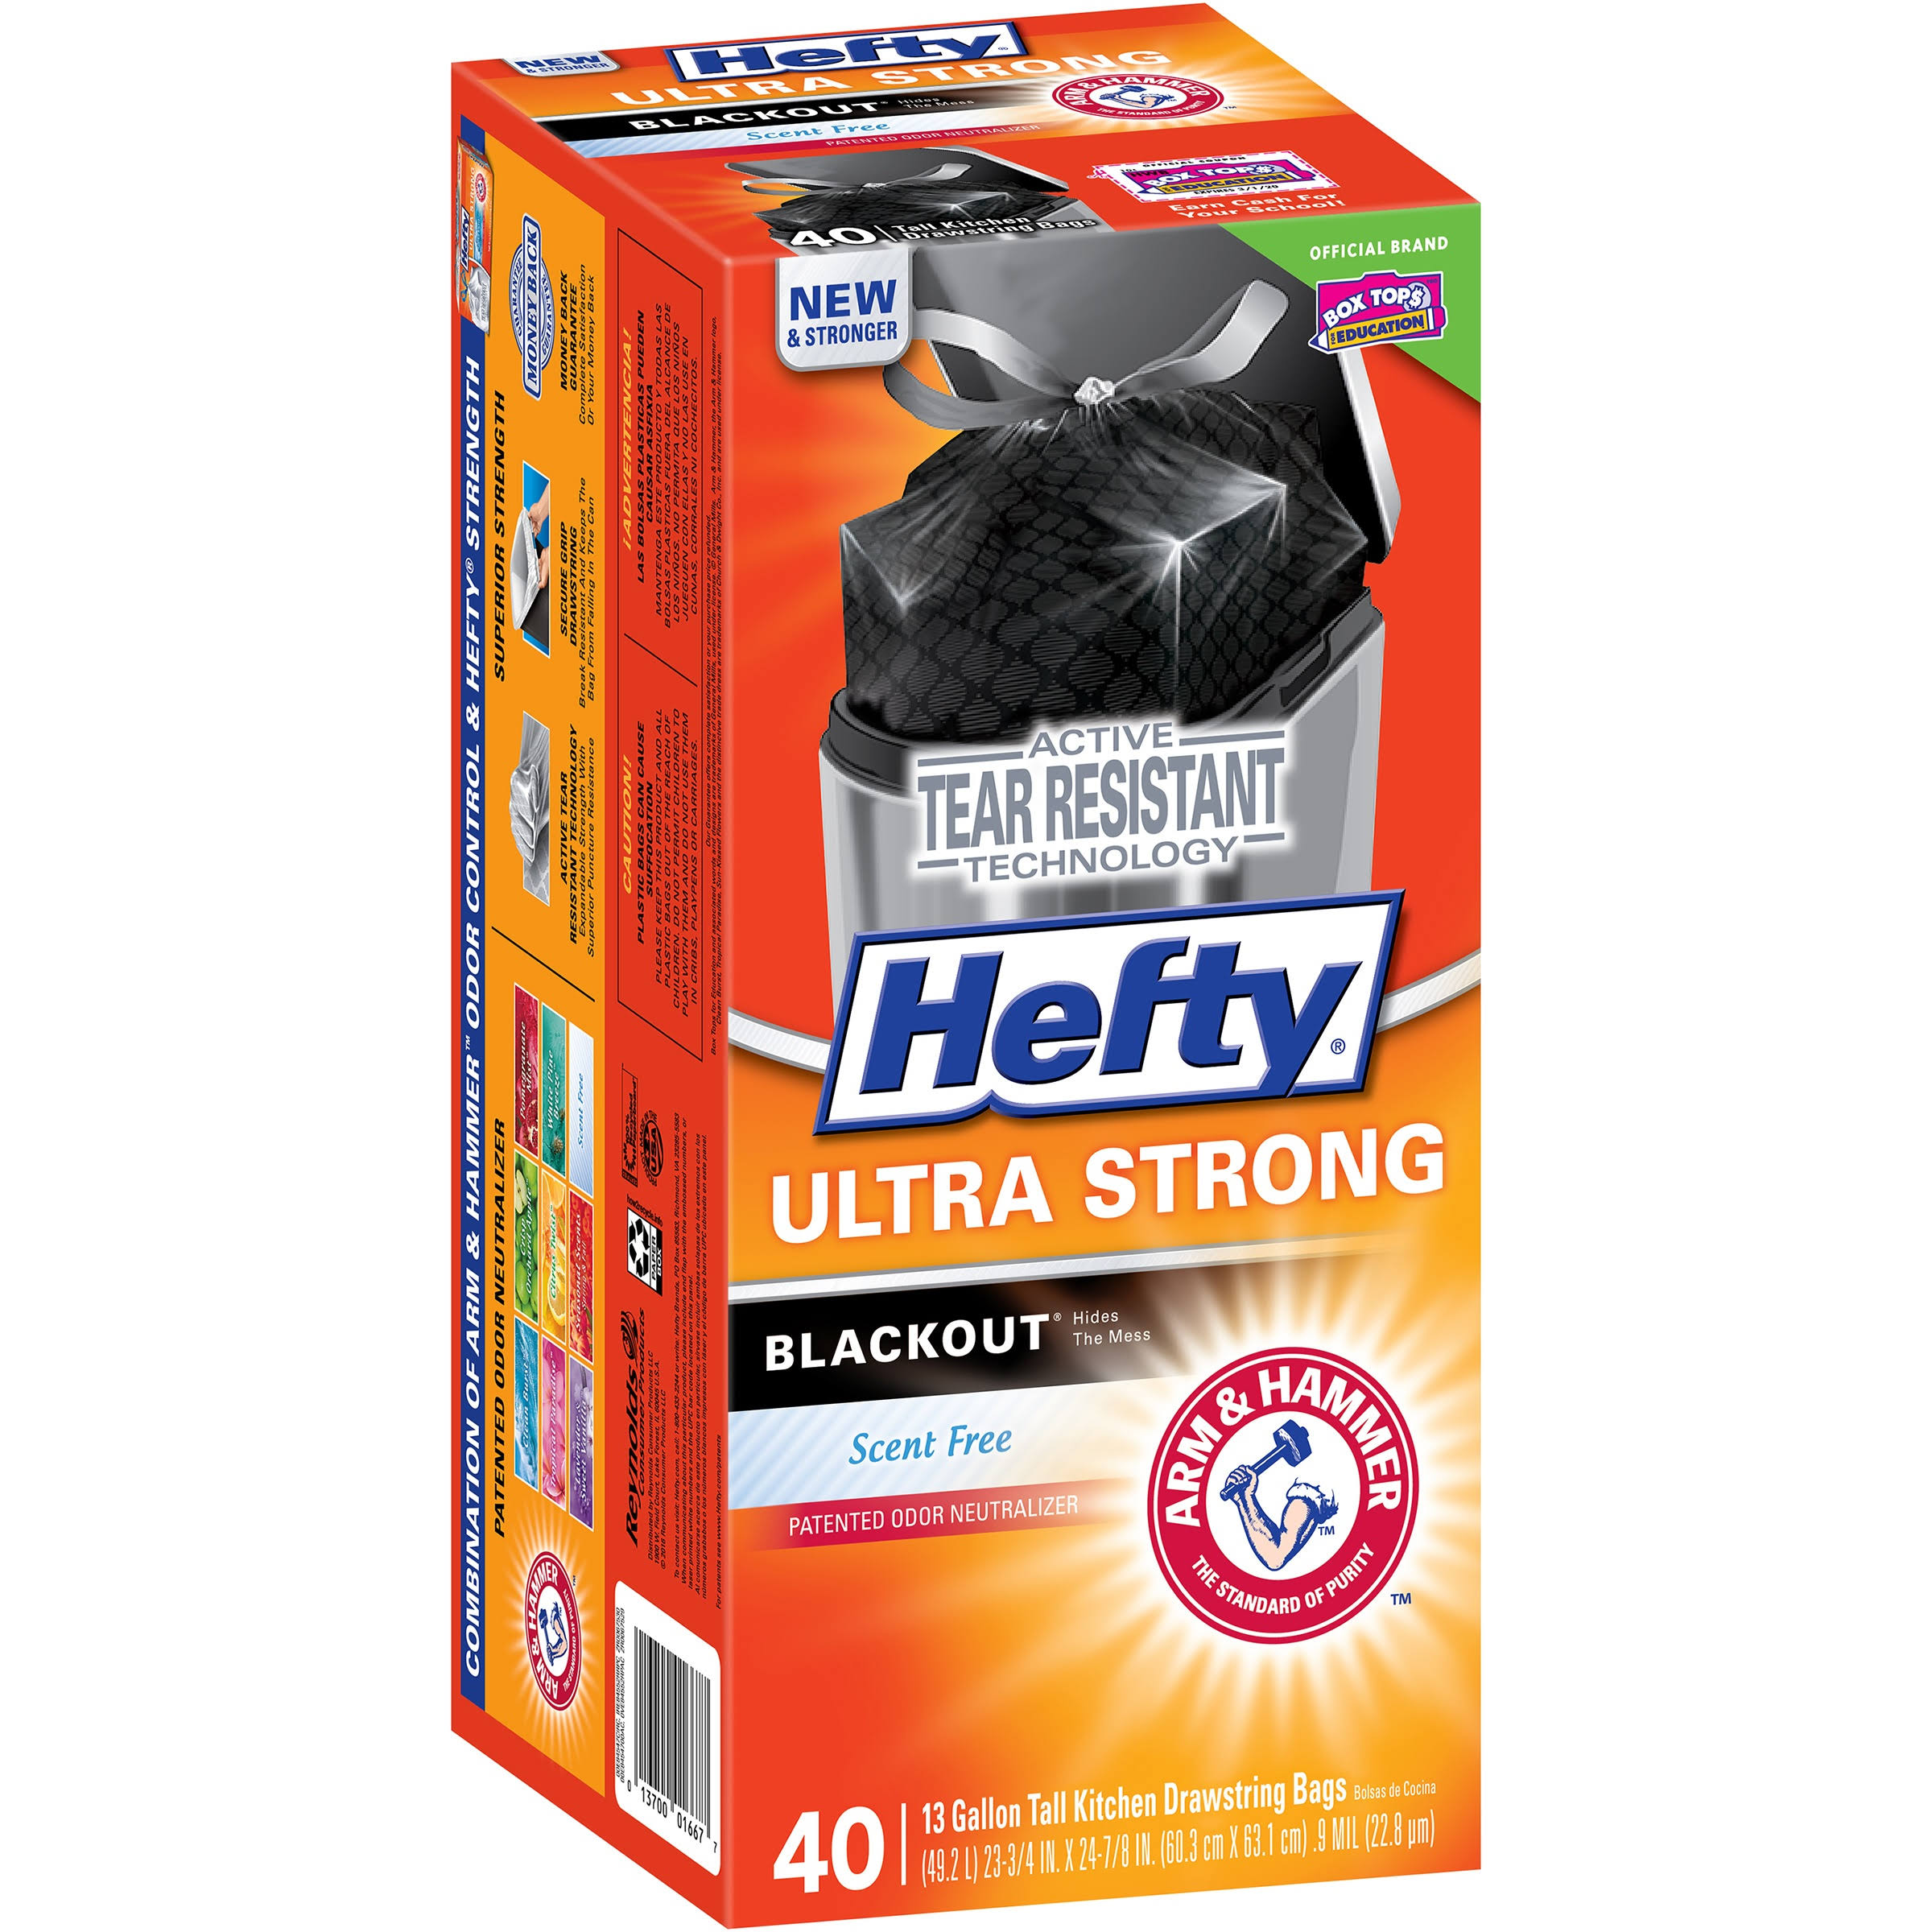 Hefty Ultra Strong Tall Kitchen Trash Bags, Blackout, Unscented, 13